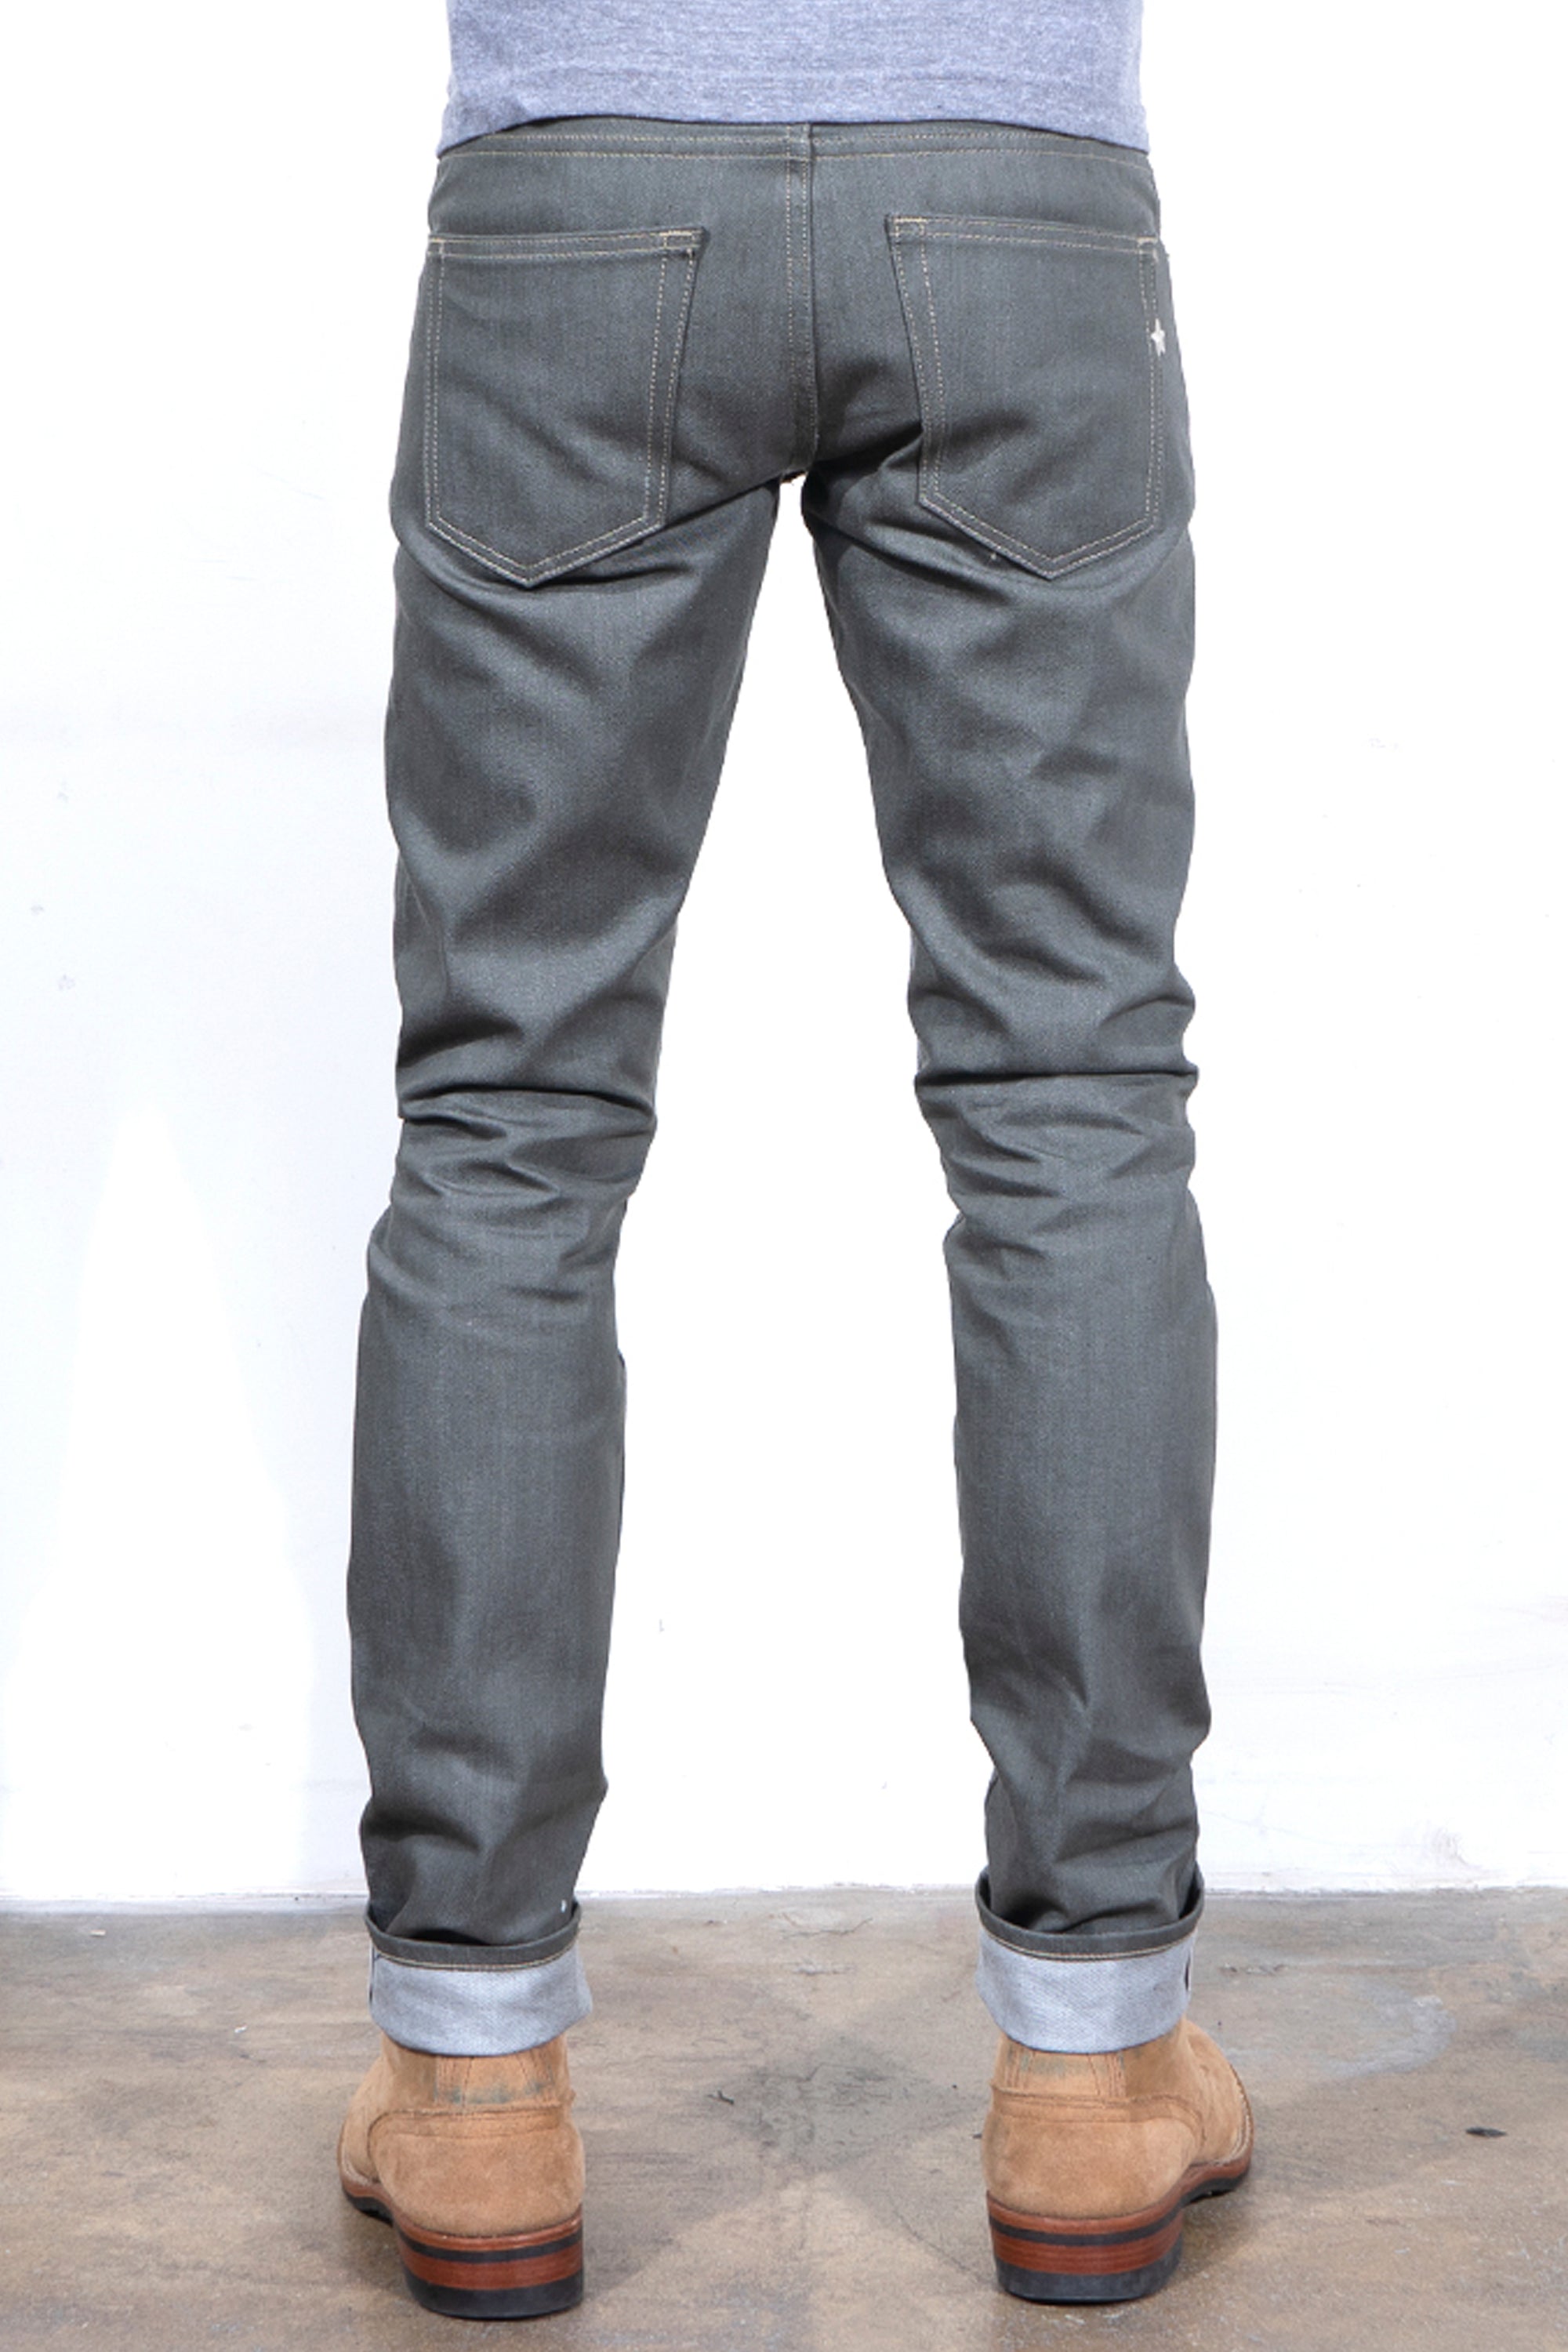 The Slim Straight 12oz Forest Grey Kaihara Japan Selvage